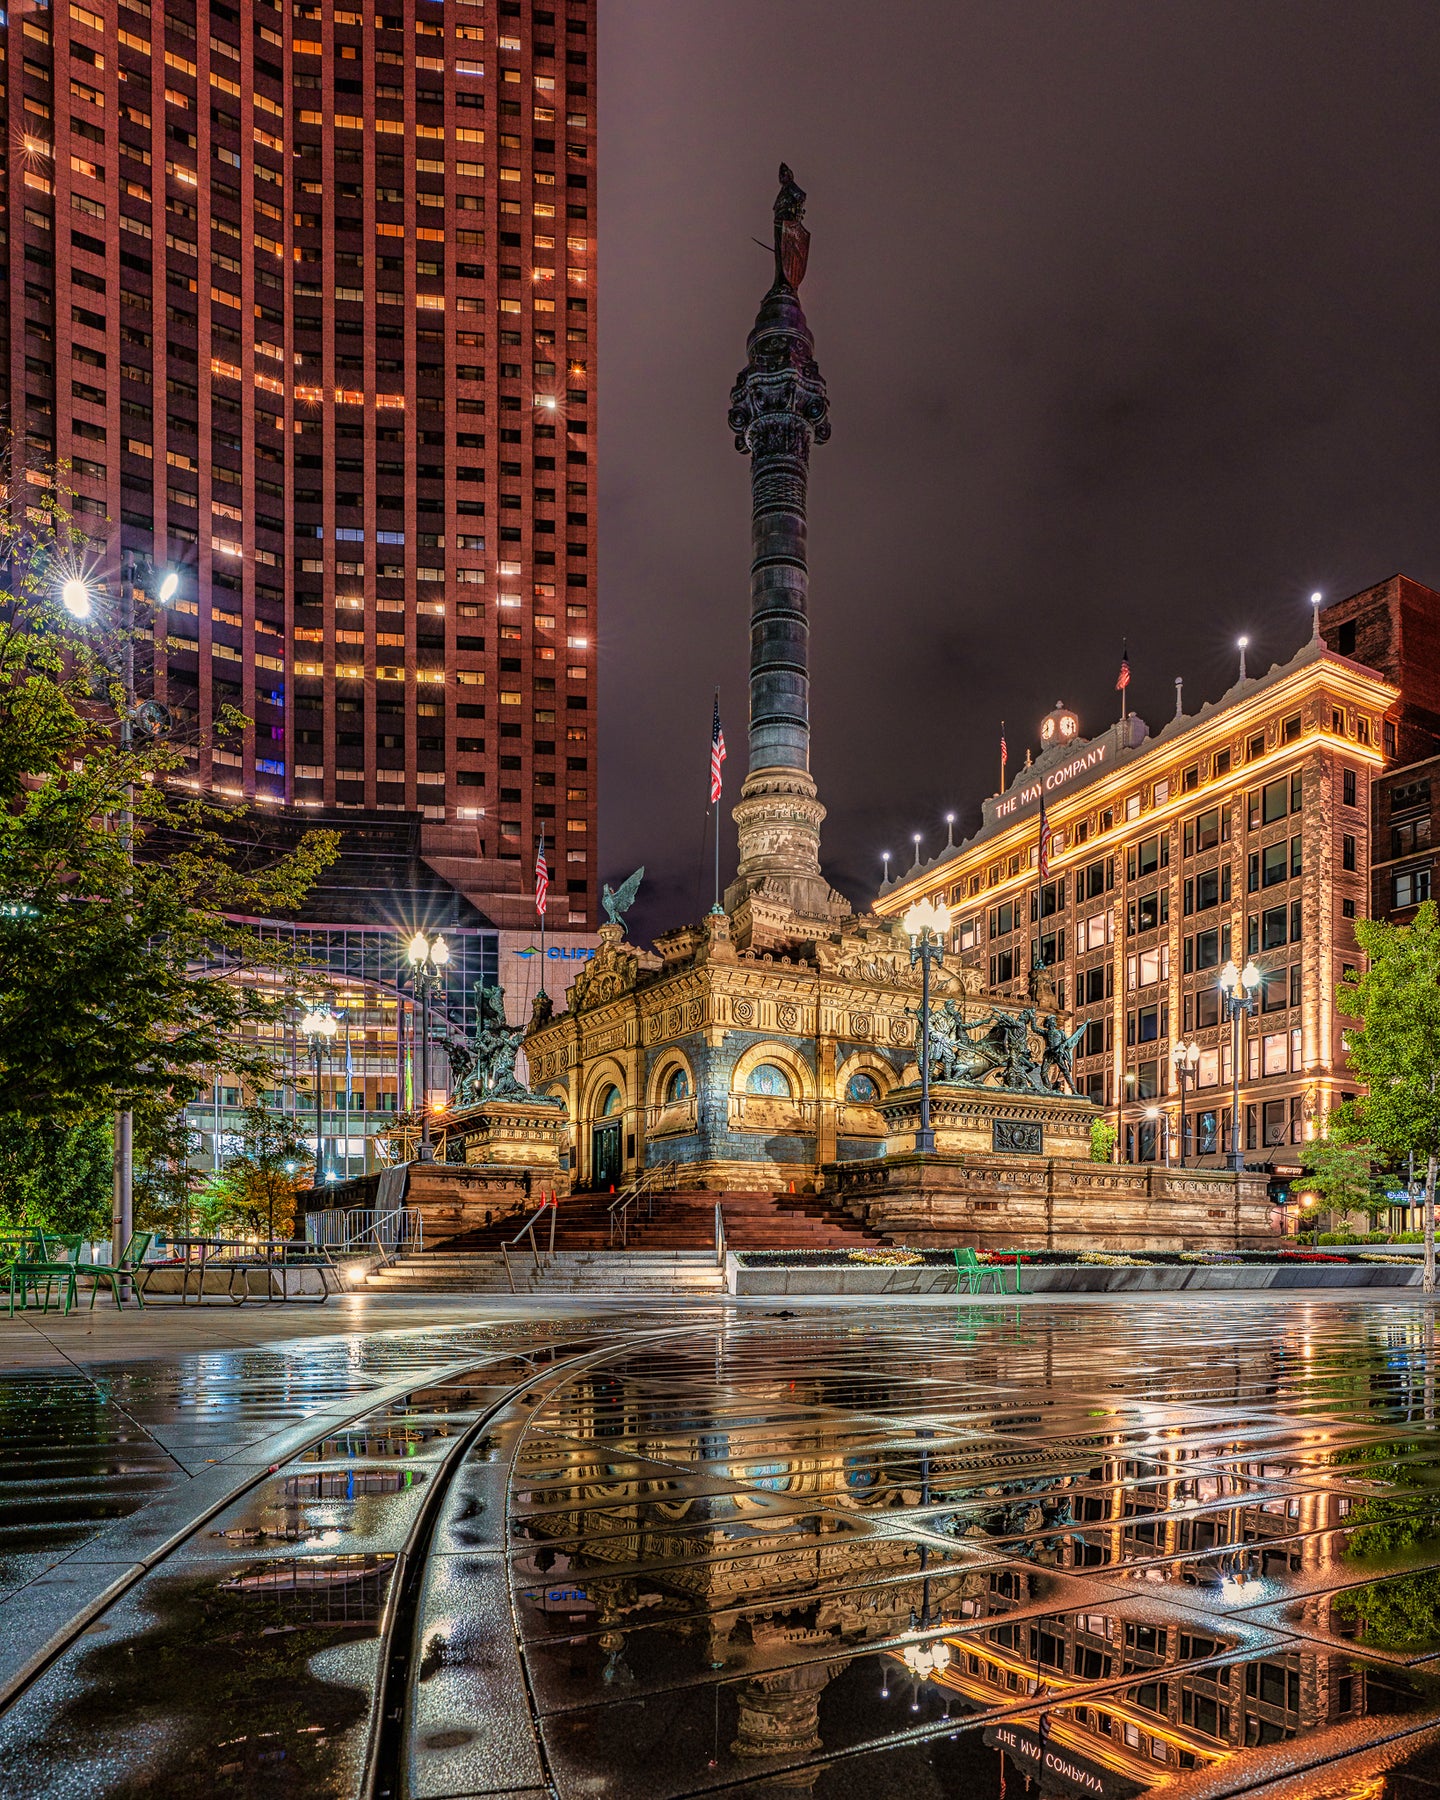 Soldiers' and Sailors' Monument - Cleveland, OH